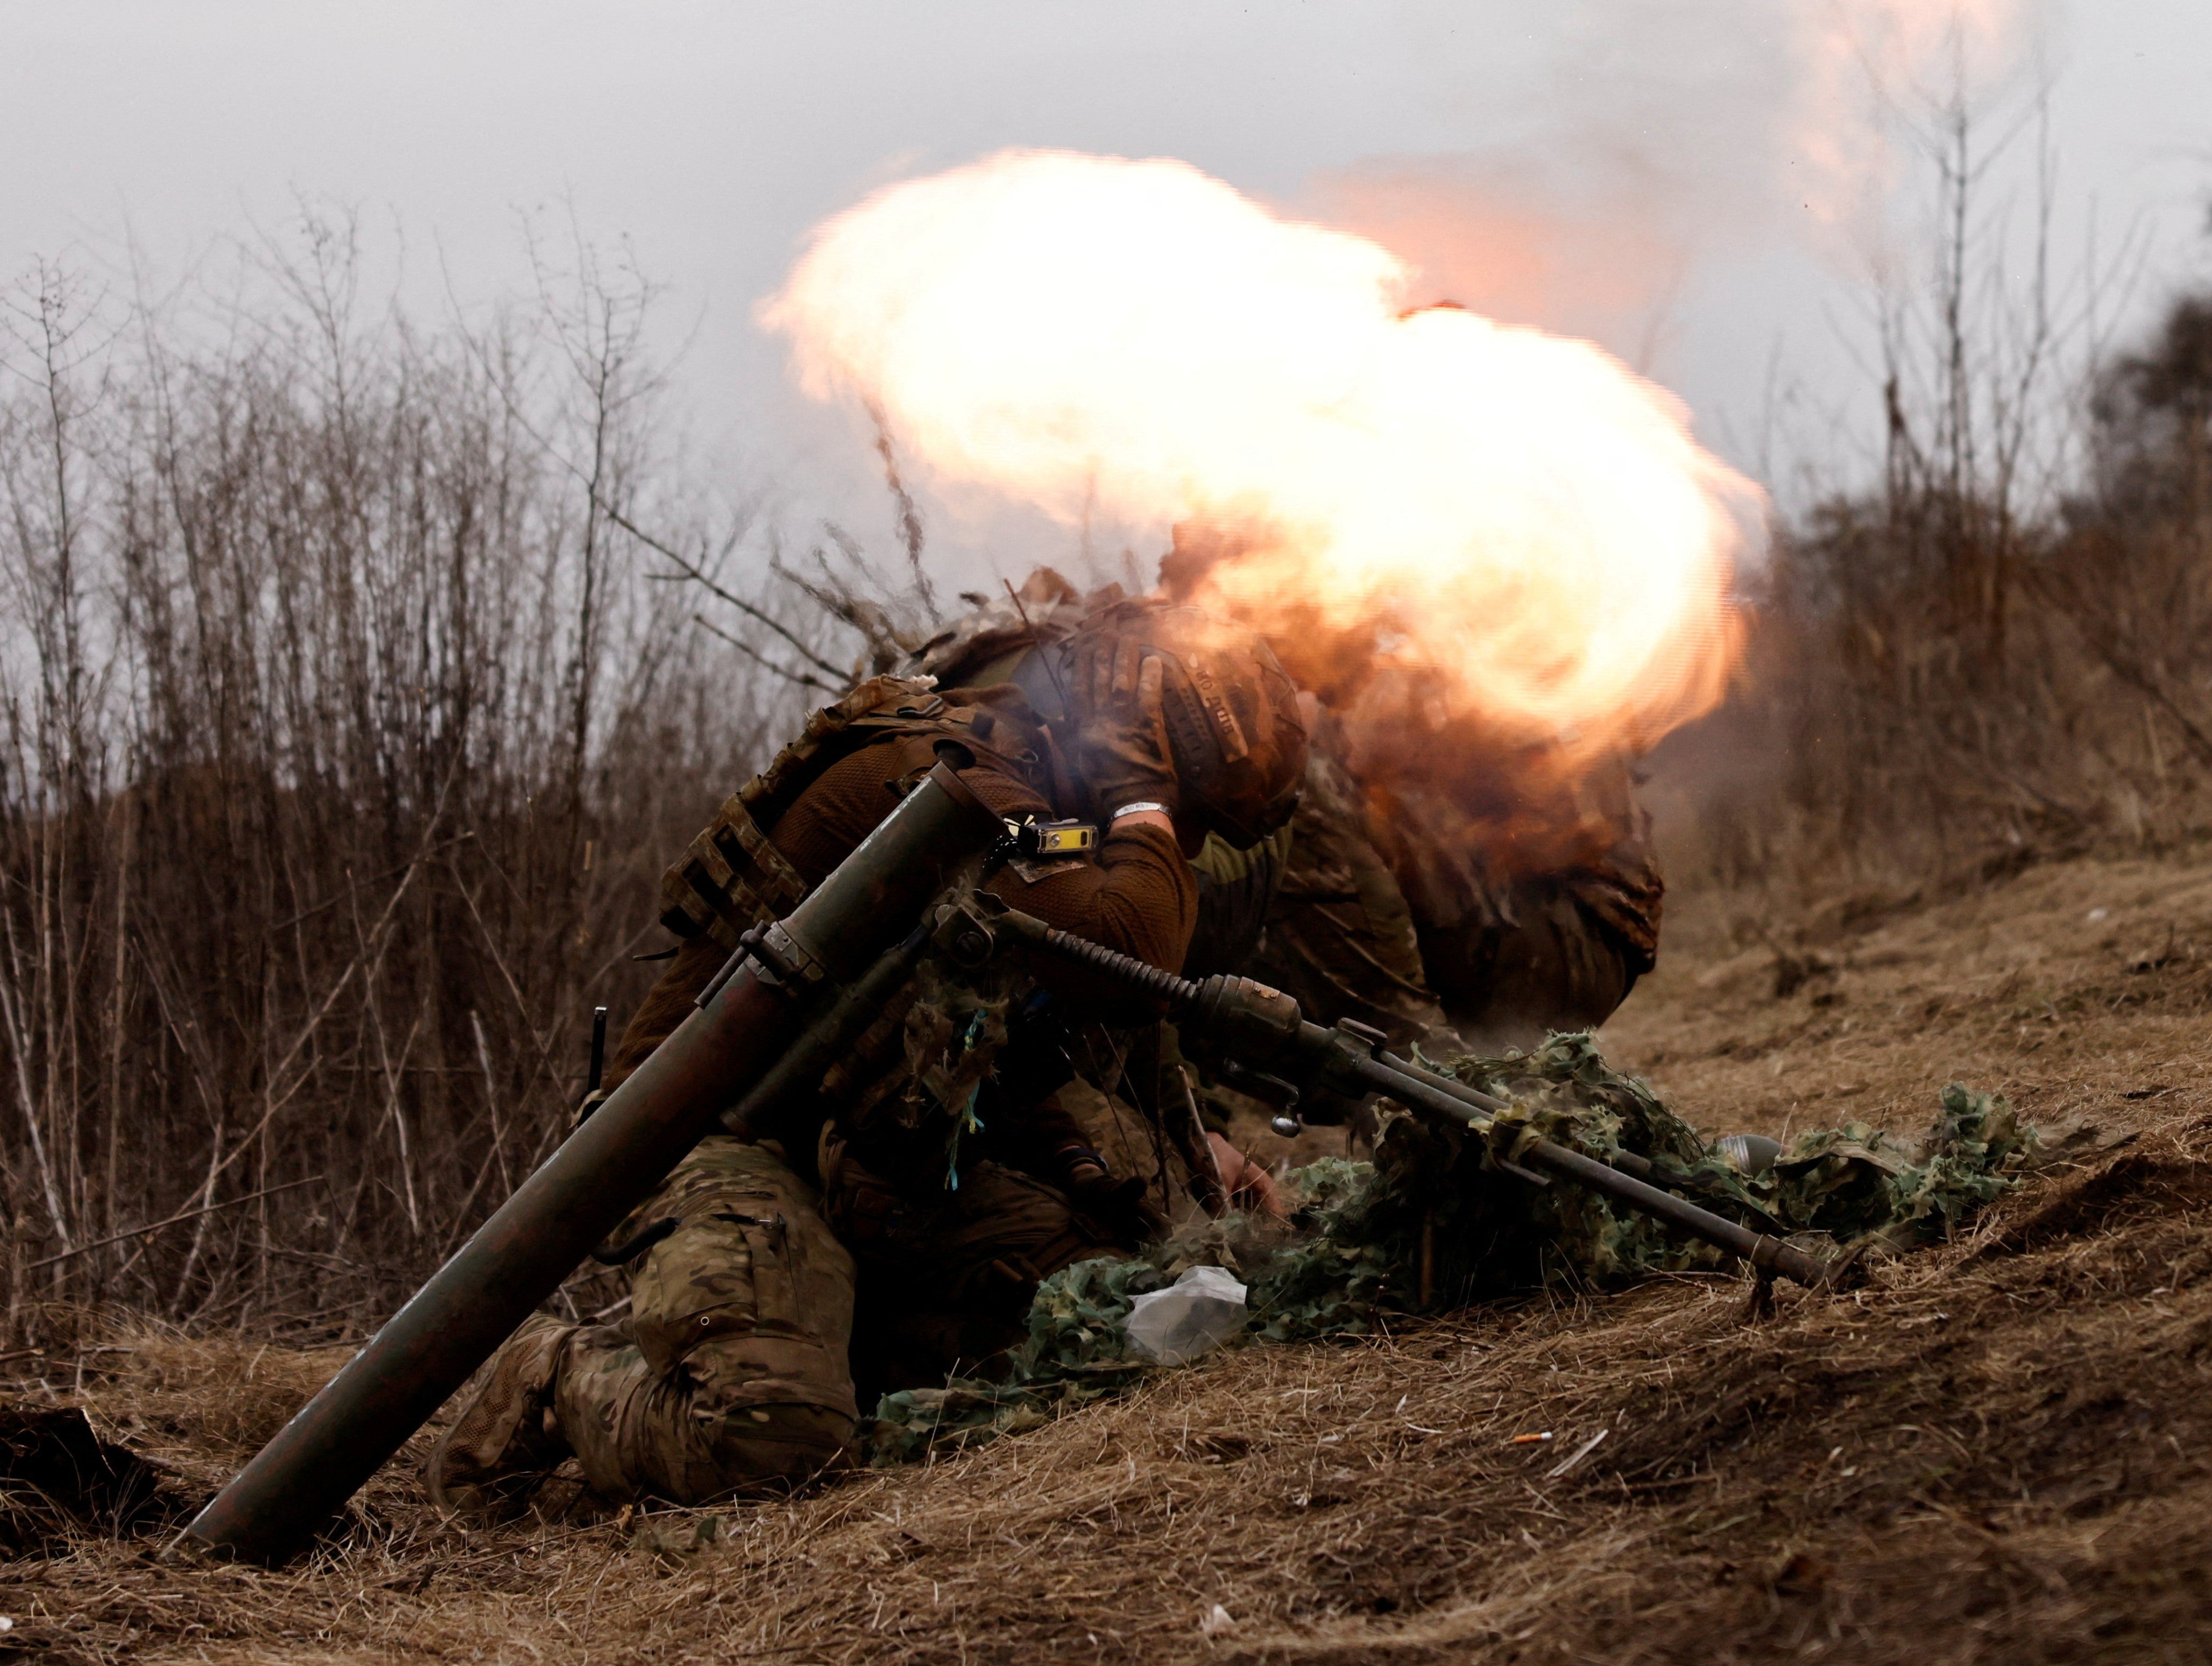 Ukrainian soldiers of the Paratroopers' of 80th brigade fire a mortar at a frontline position near Bakhmut